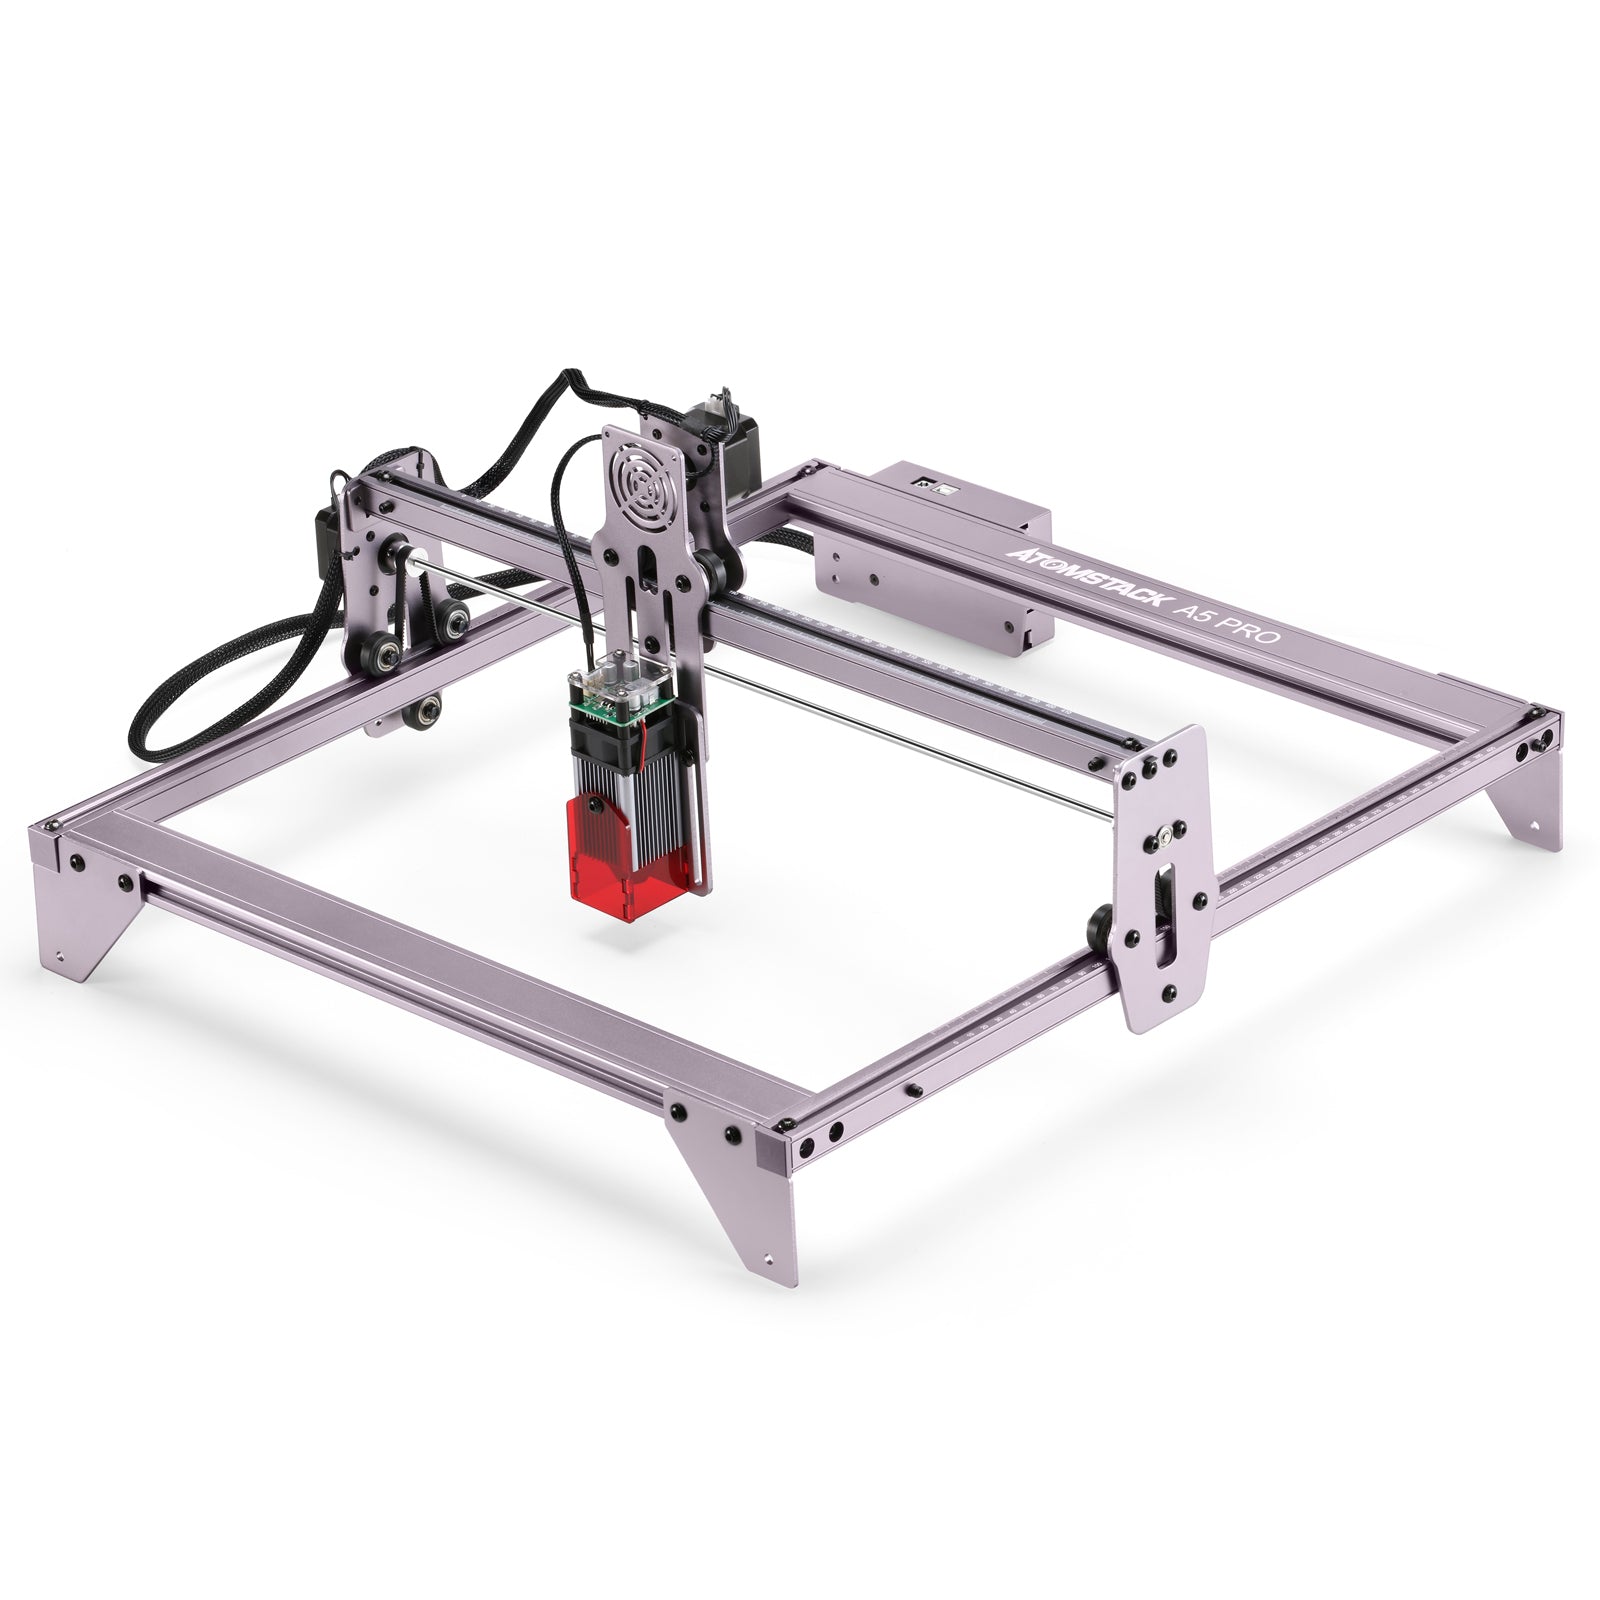 Atomstack Official Store Ι Laser Engraver & Accessories